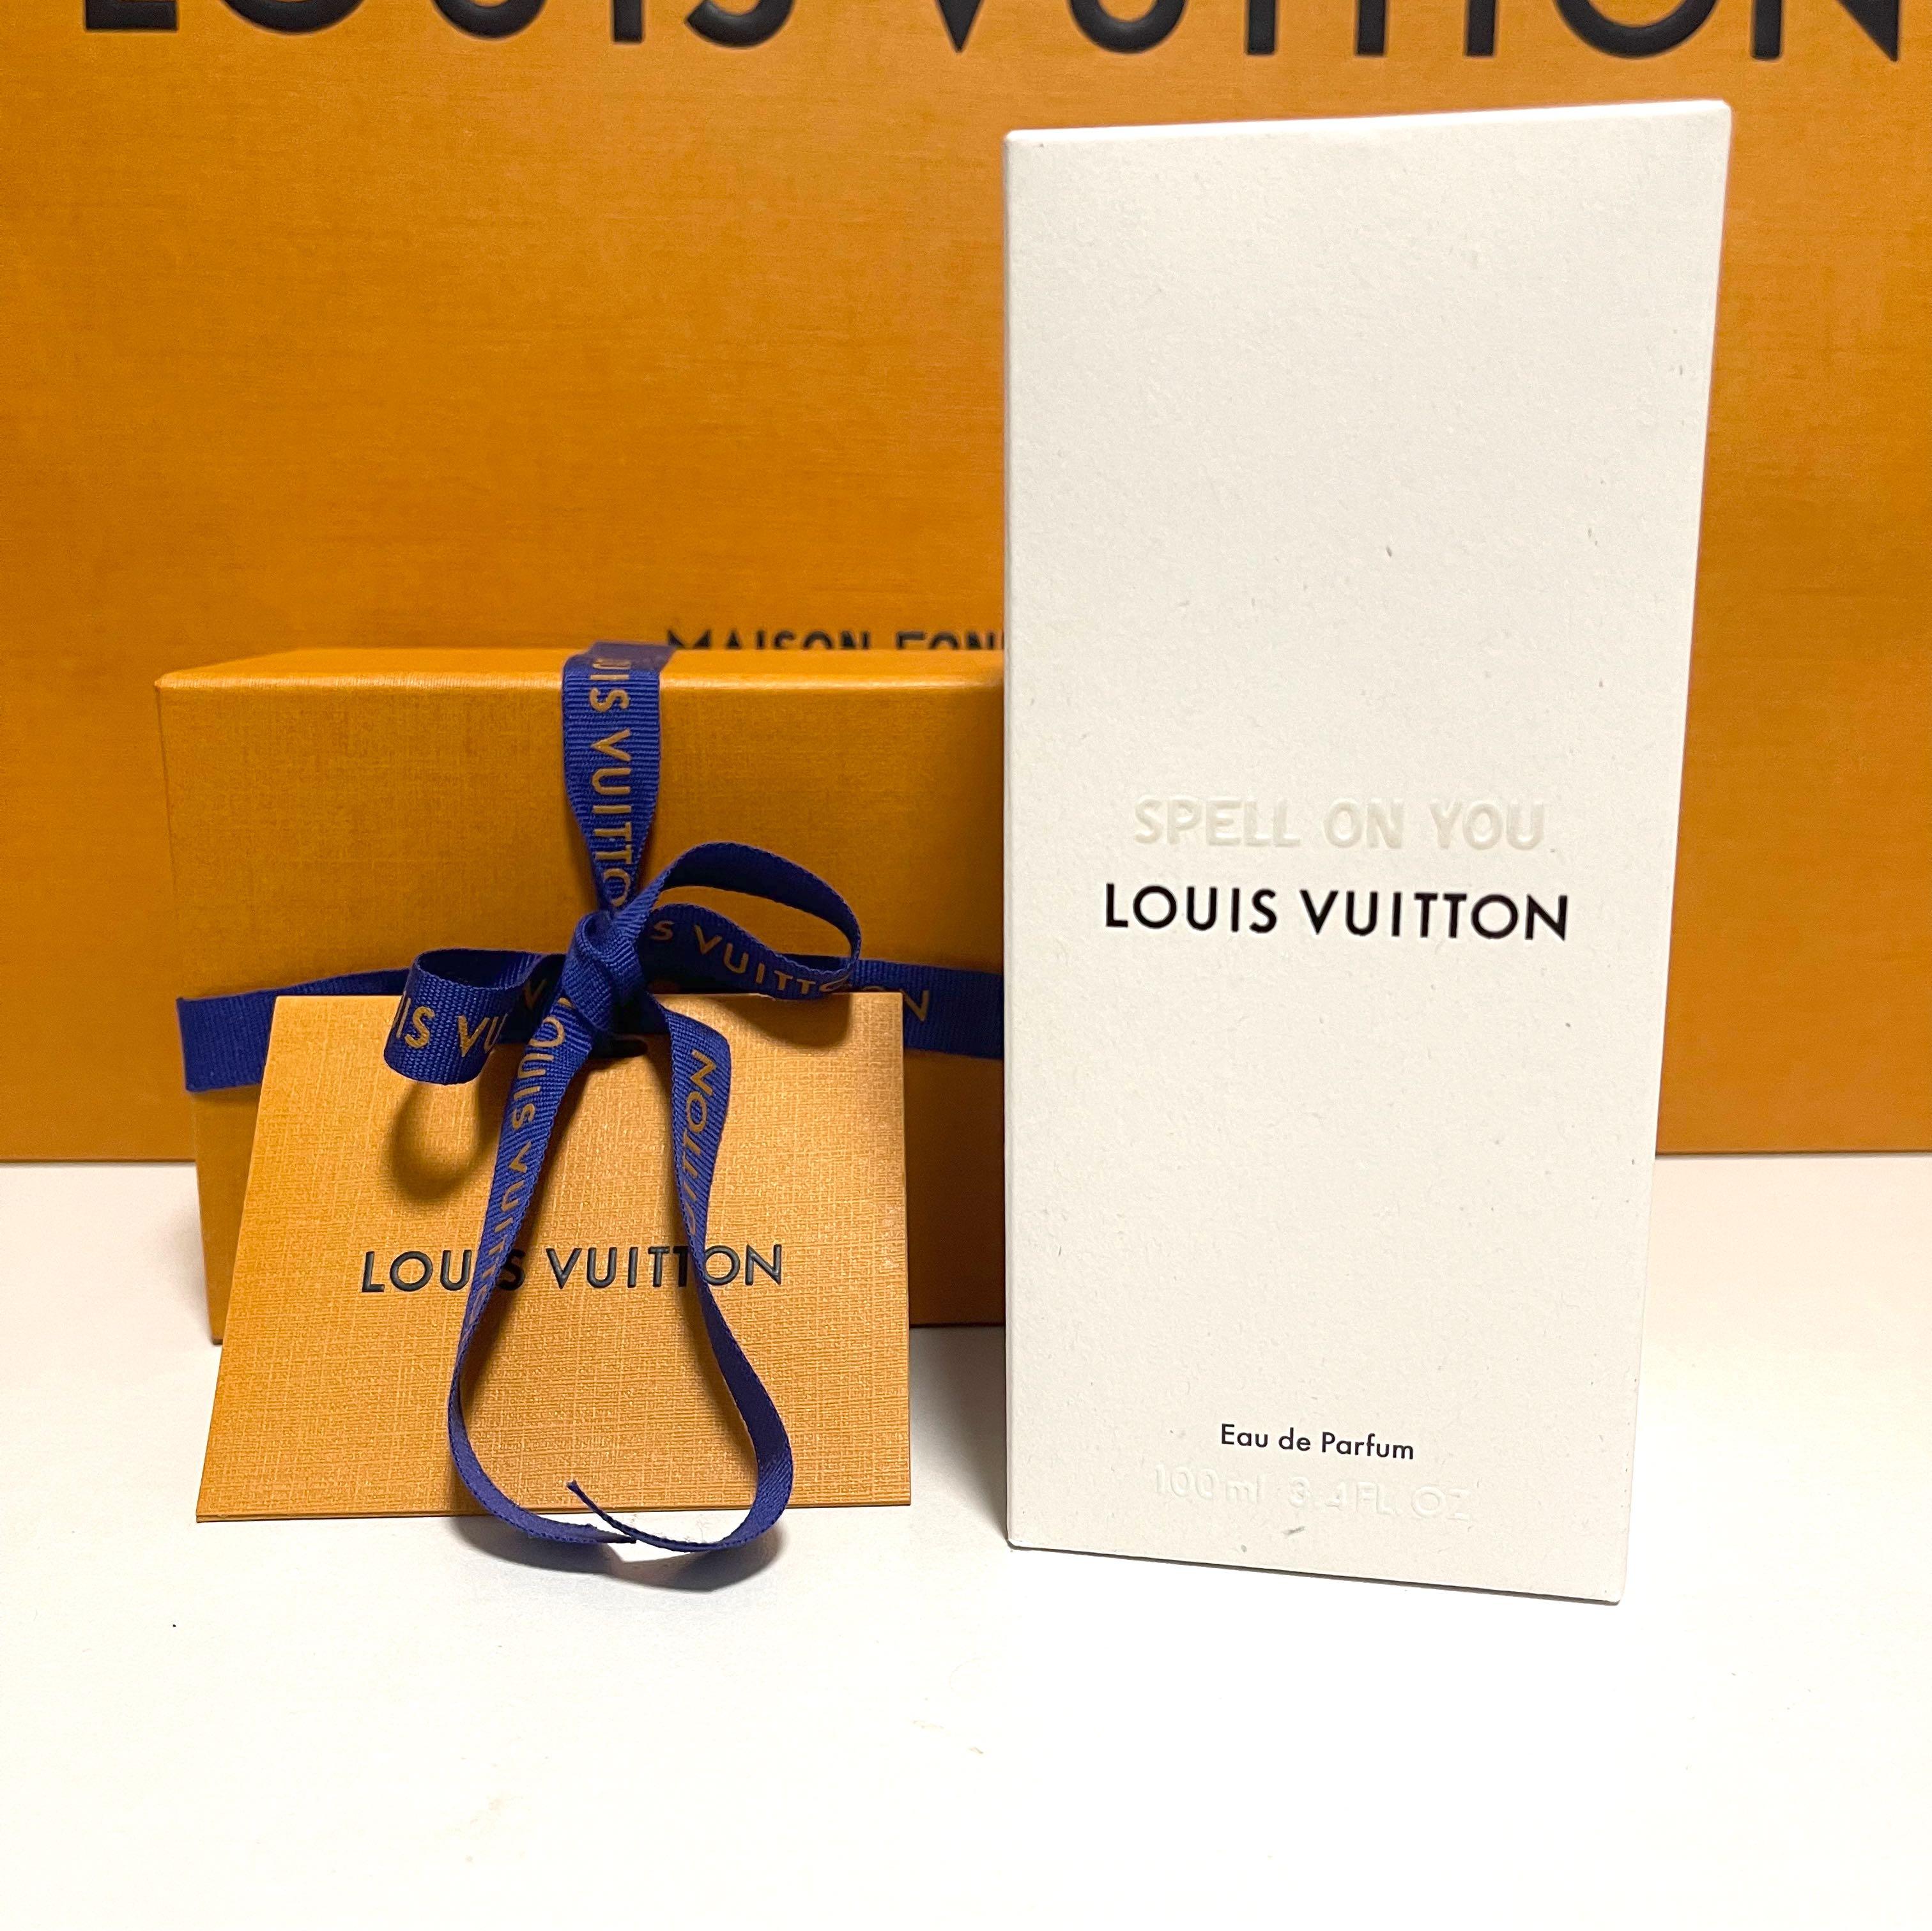 Louis Vuitton Spell On You Perfume, Beauty & Personal Care, Fragrance &  Deodorants on Carousell